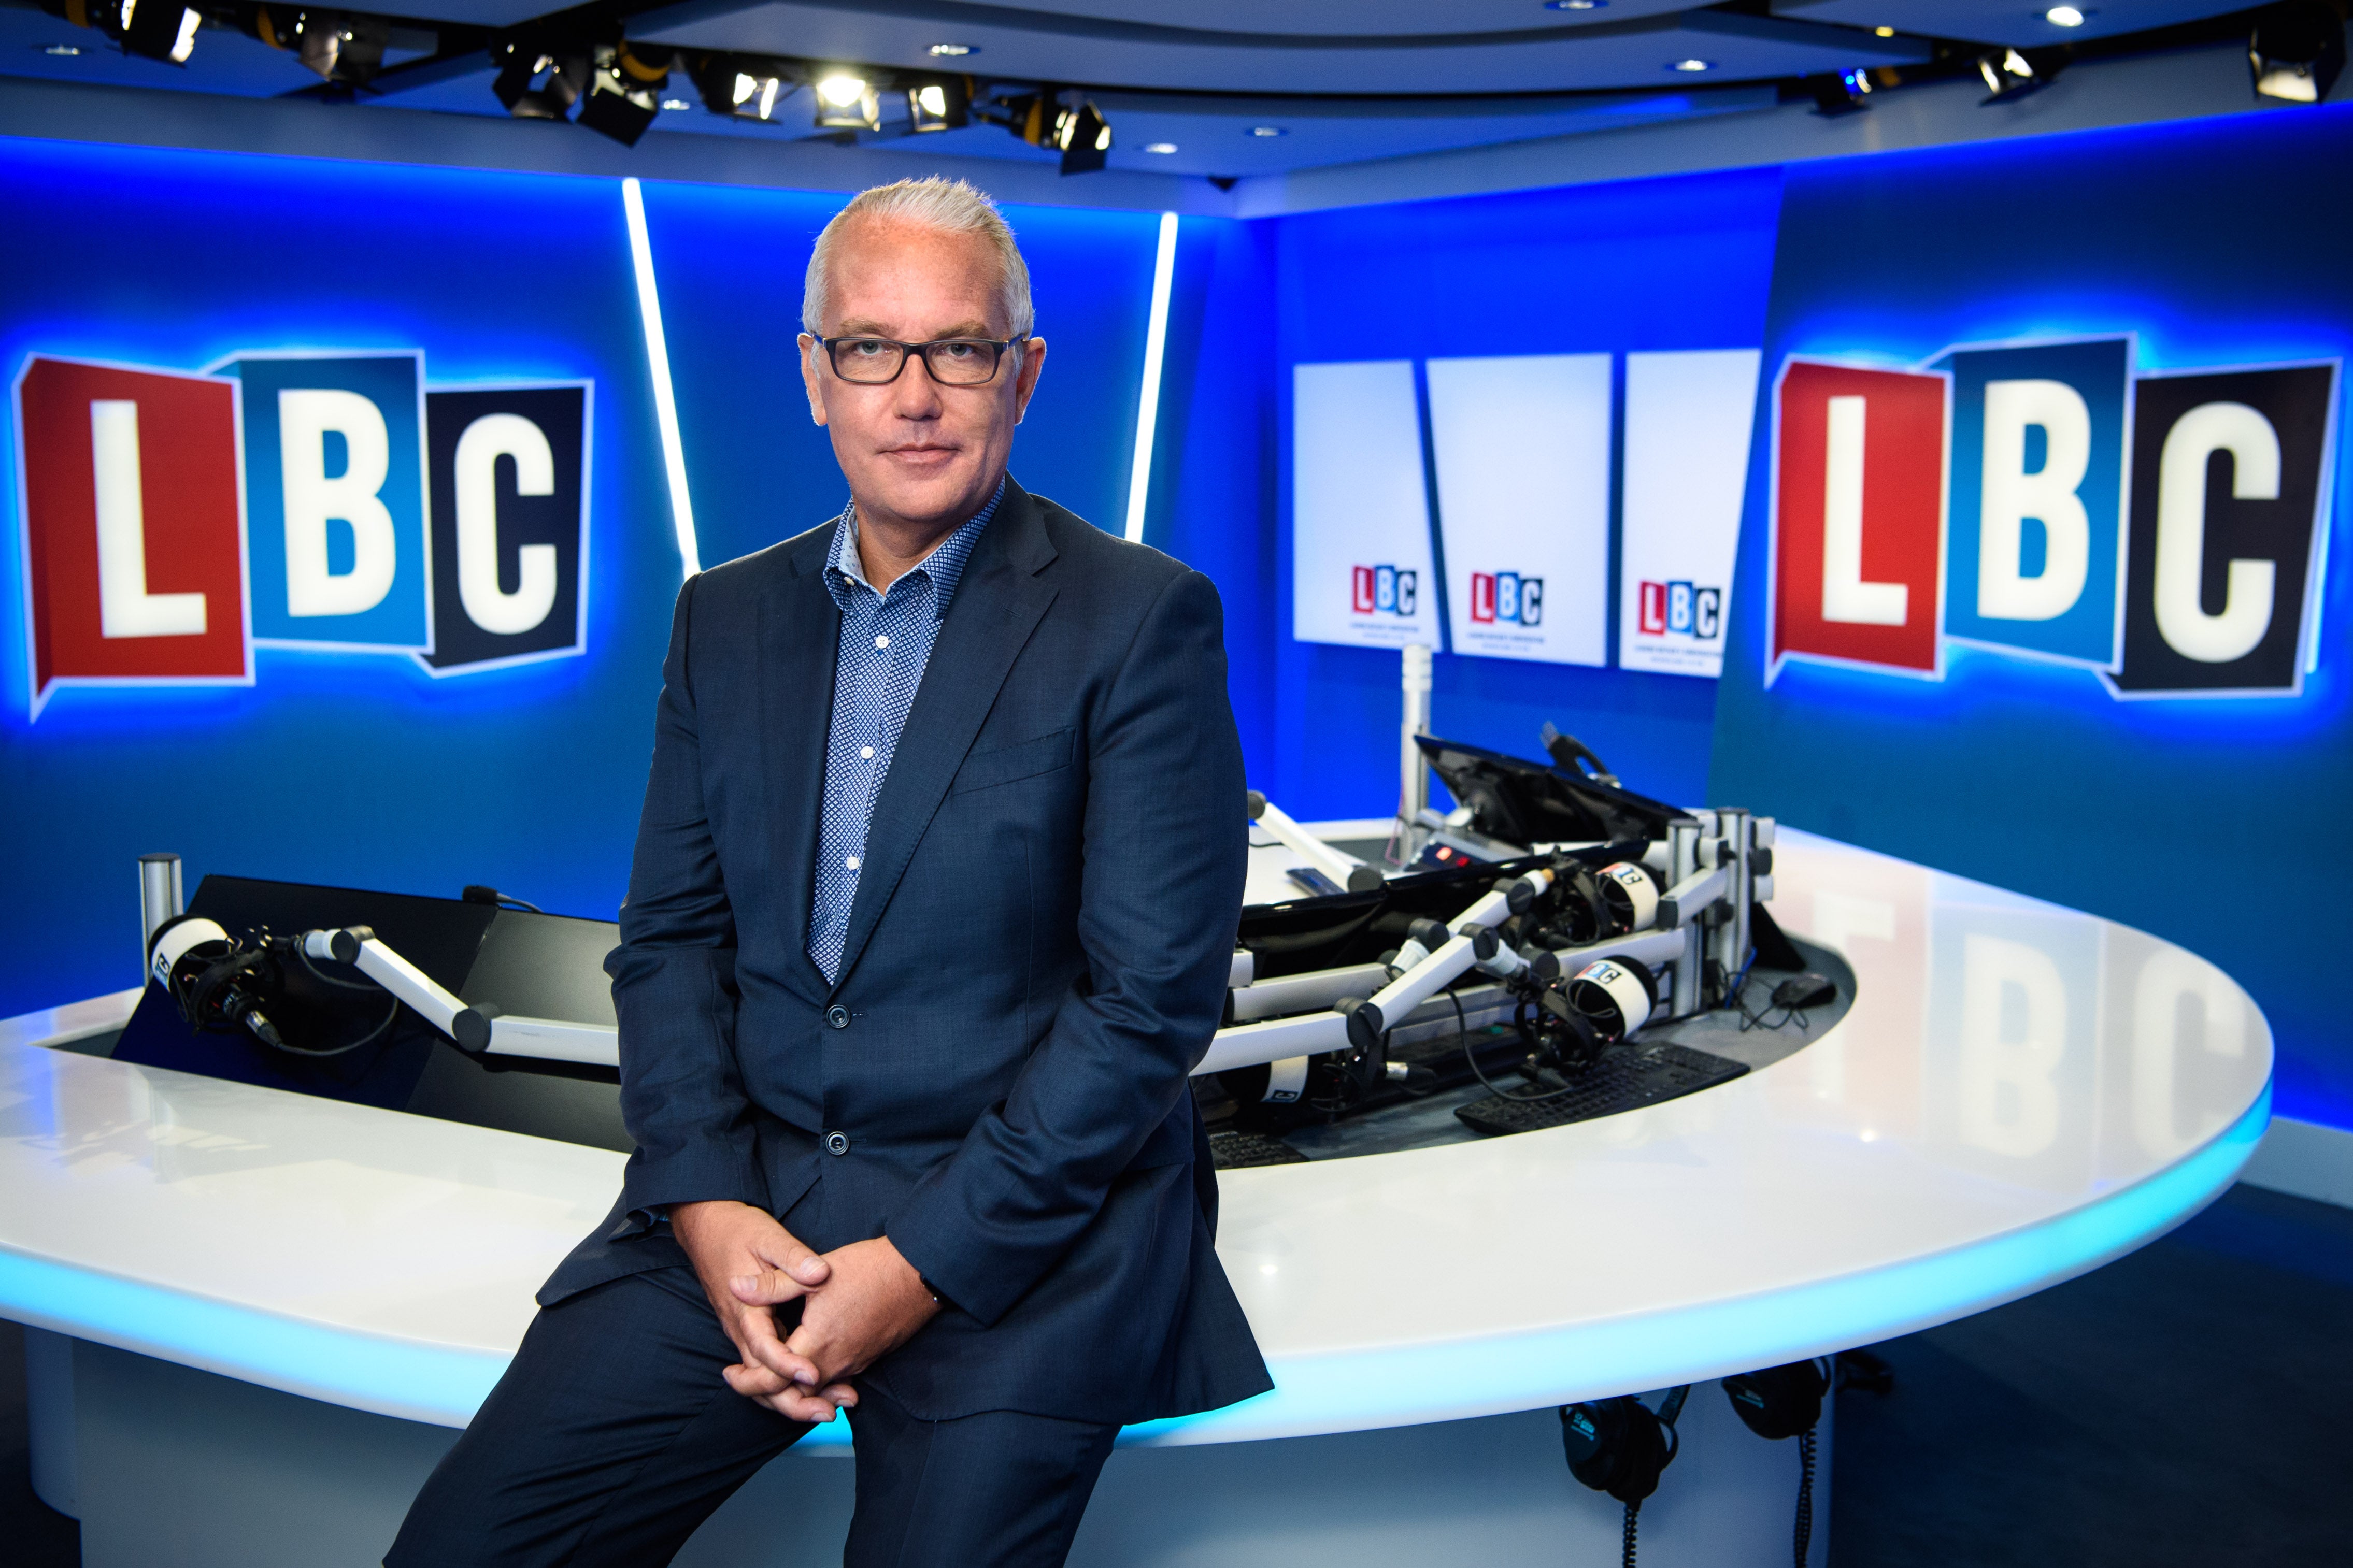 Former BBC PM presenter Eddie Mair will host two-hour 'drivetime' show on LBC as Iain Dale bumped to evening slot